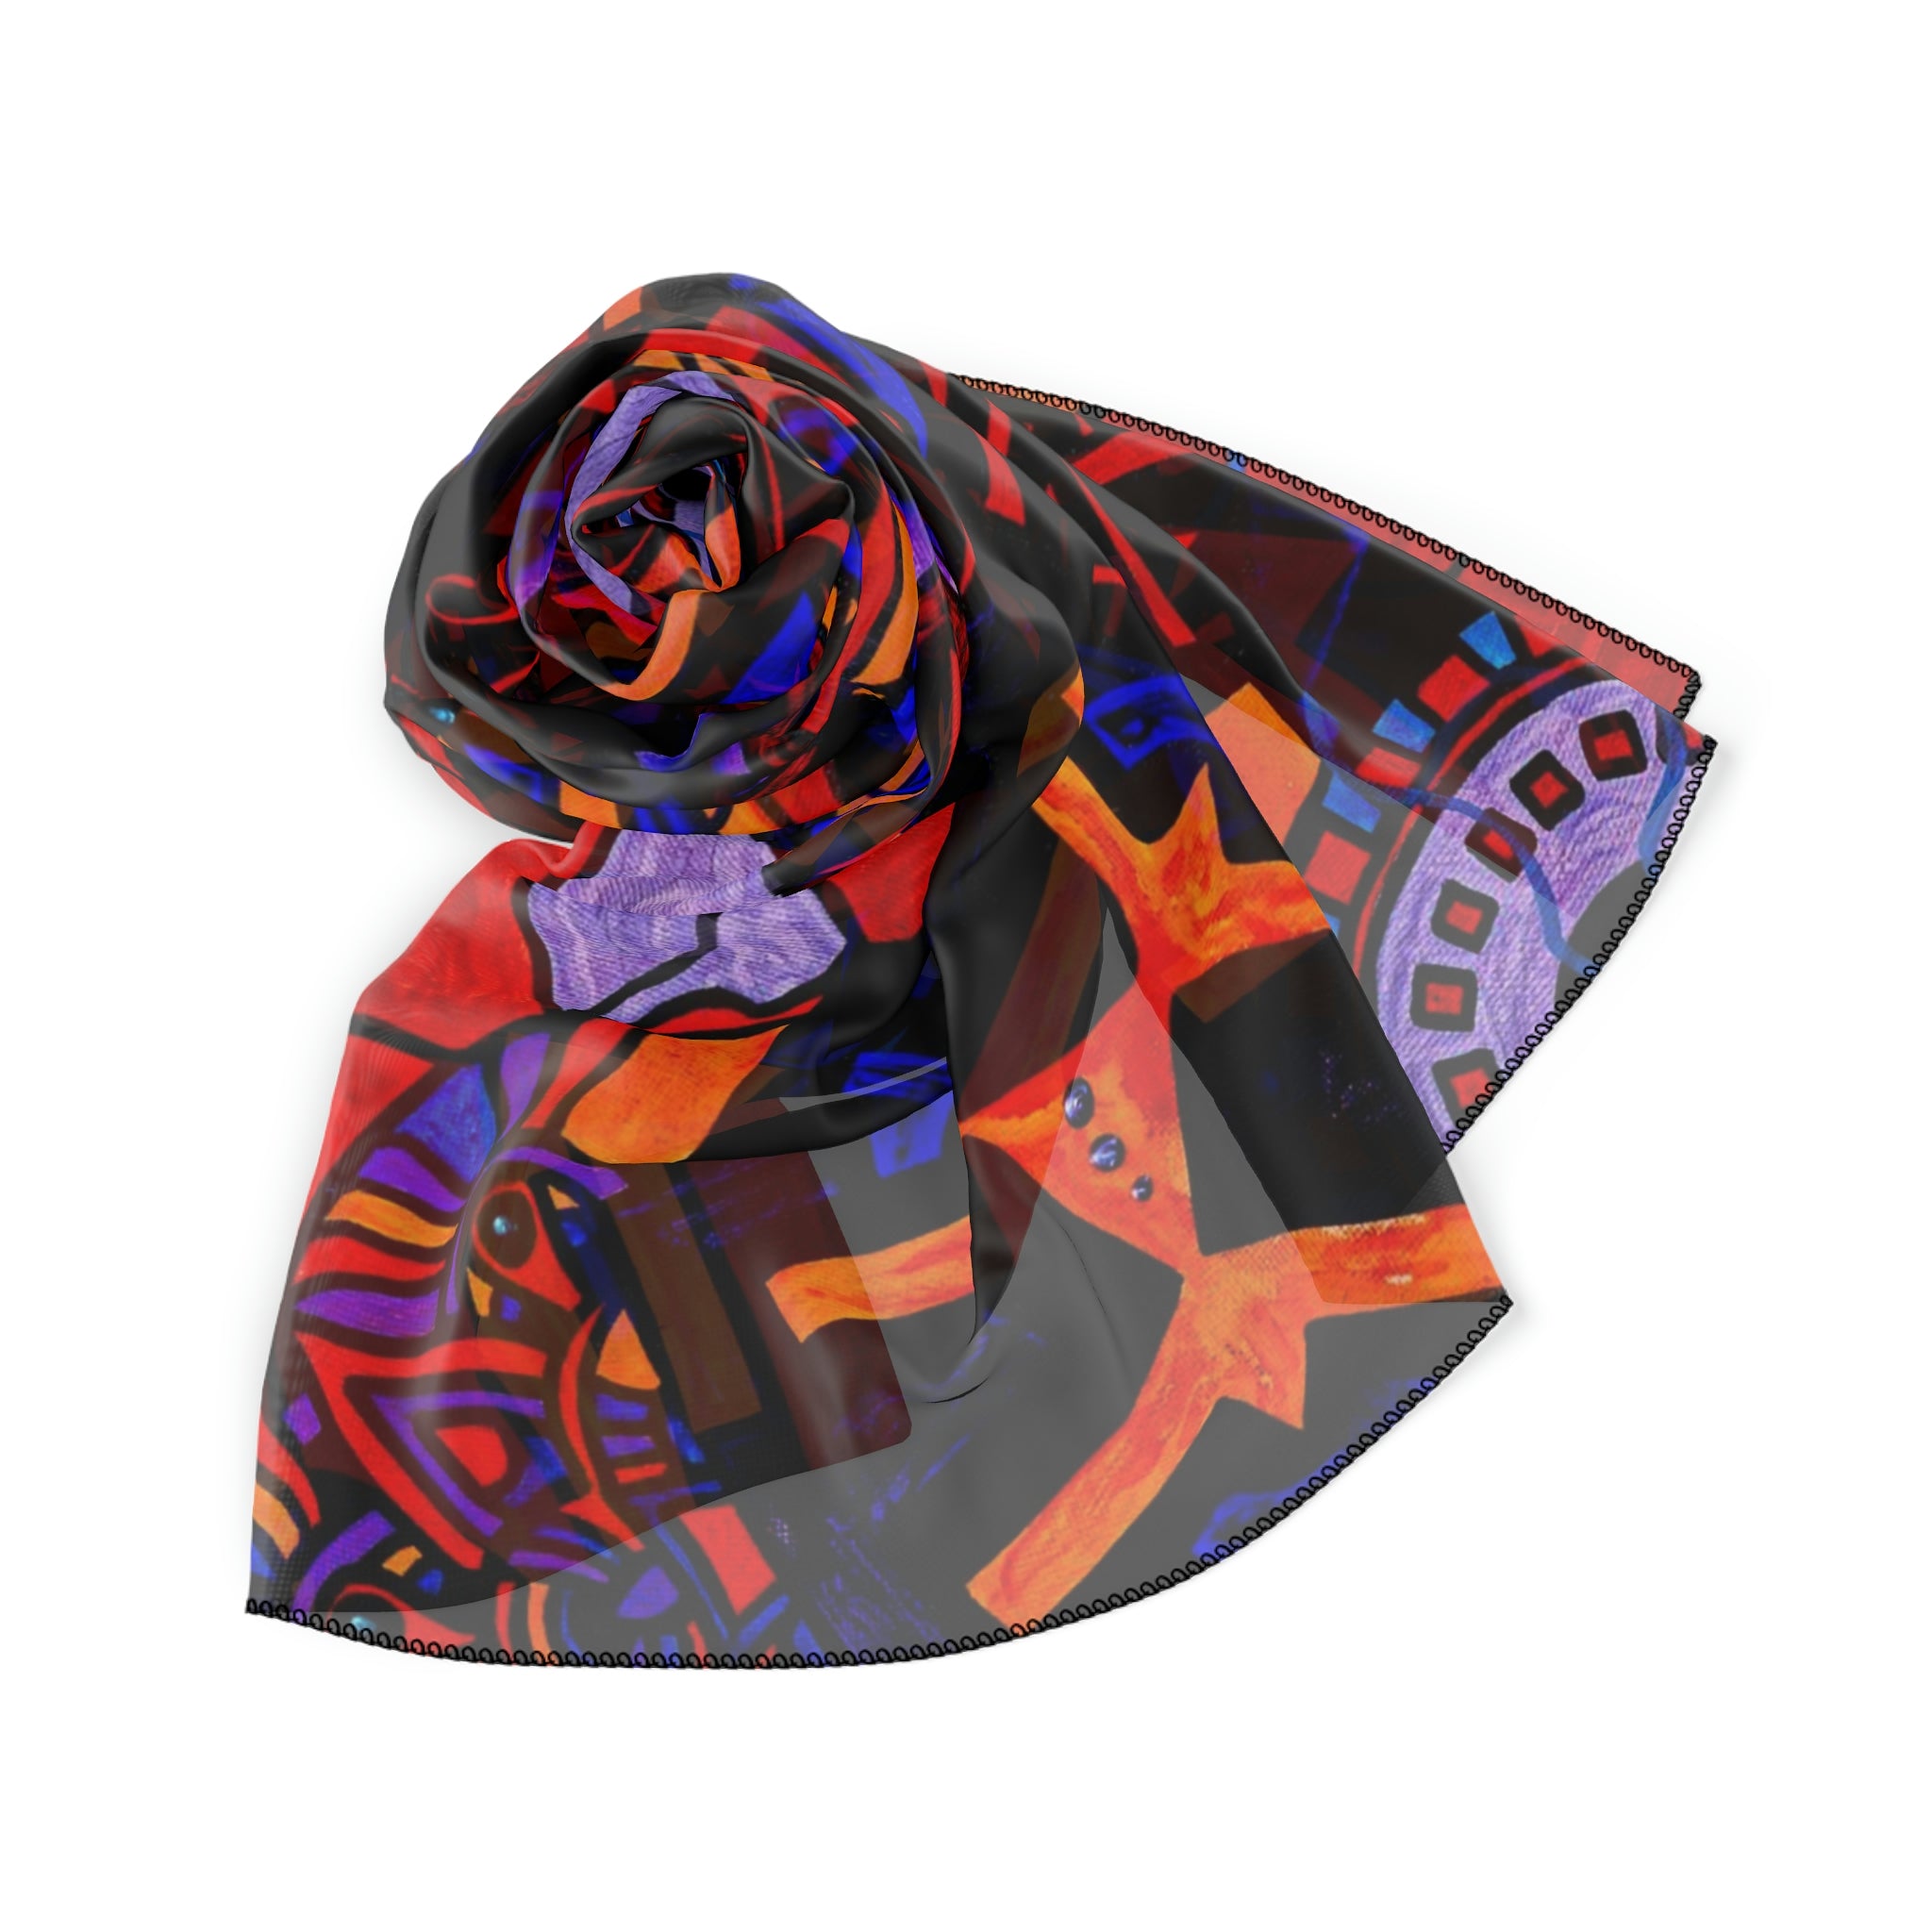 get-the-official-alnilam-strength-grid-frequency-scarf-online-sale_2.jpg